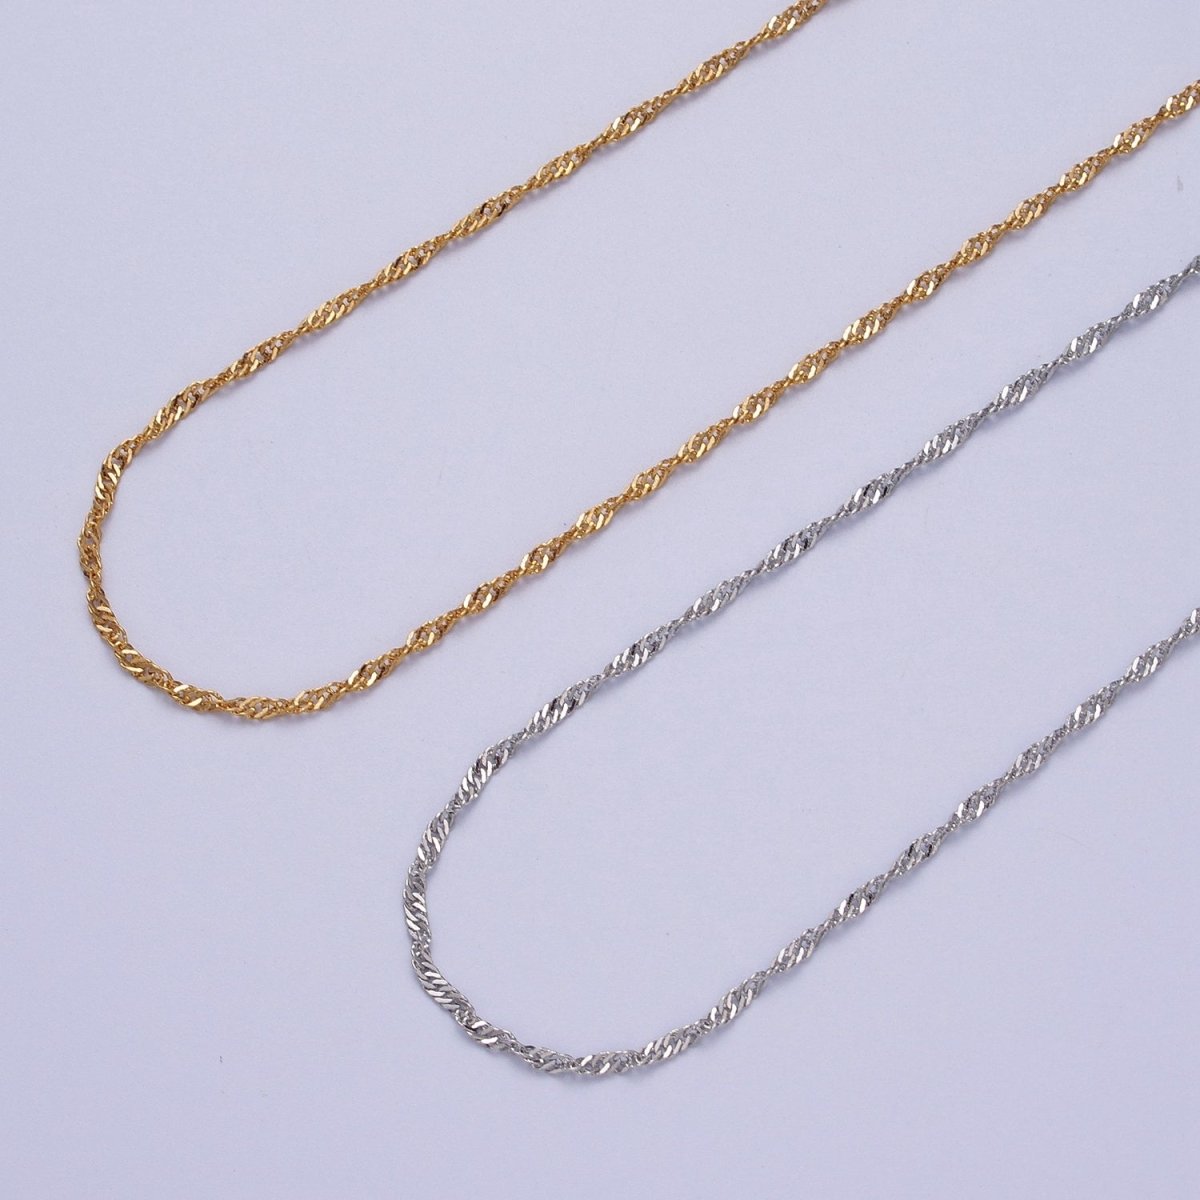 24K Gold Filled 2.5mm Width Singapore Twist Unfinished Chain in Gold & Silver | ROLL-901, ROLL-902 Clearance Pricing - DLUXCA